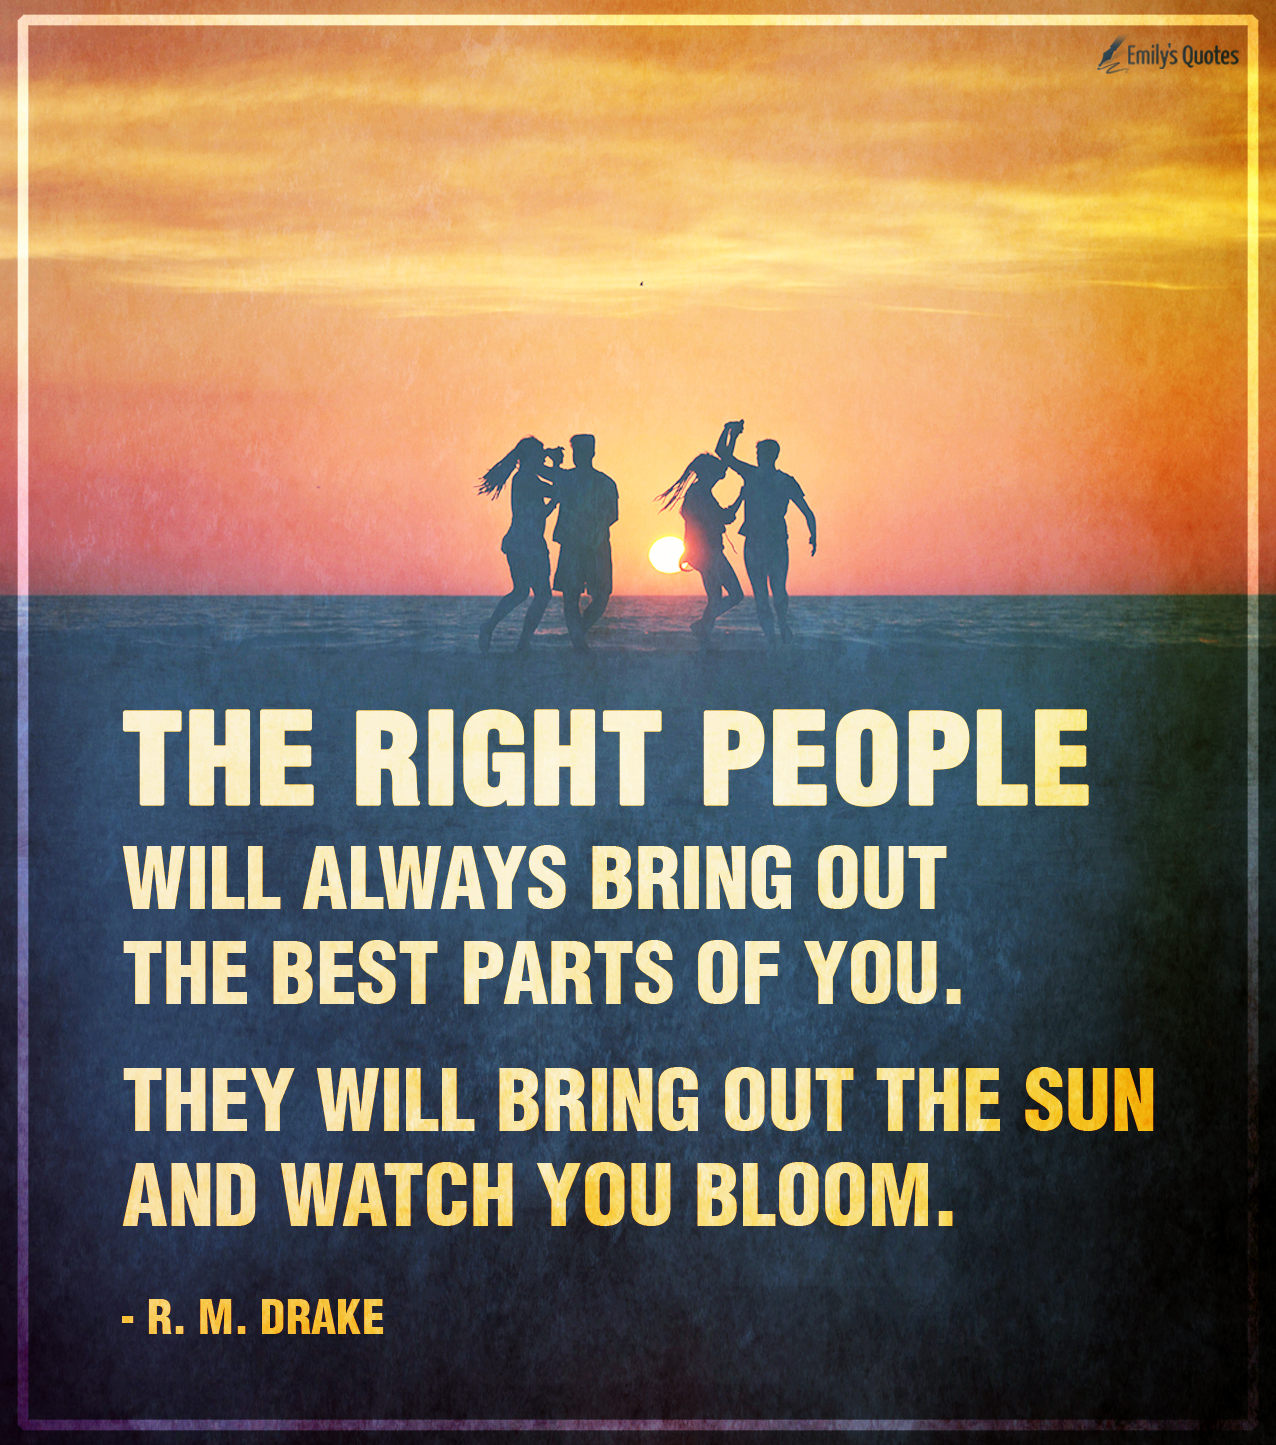 The right people will always bring out the best parts of you. They will bring out